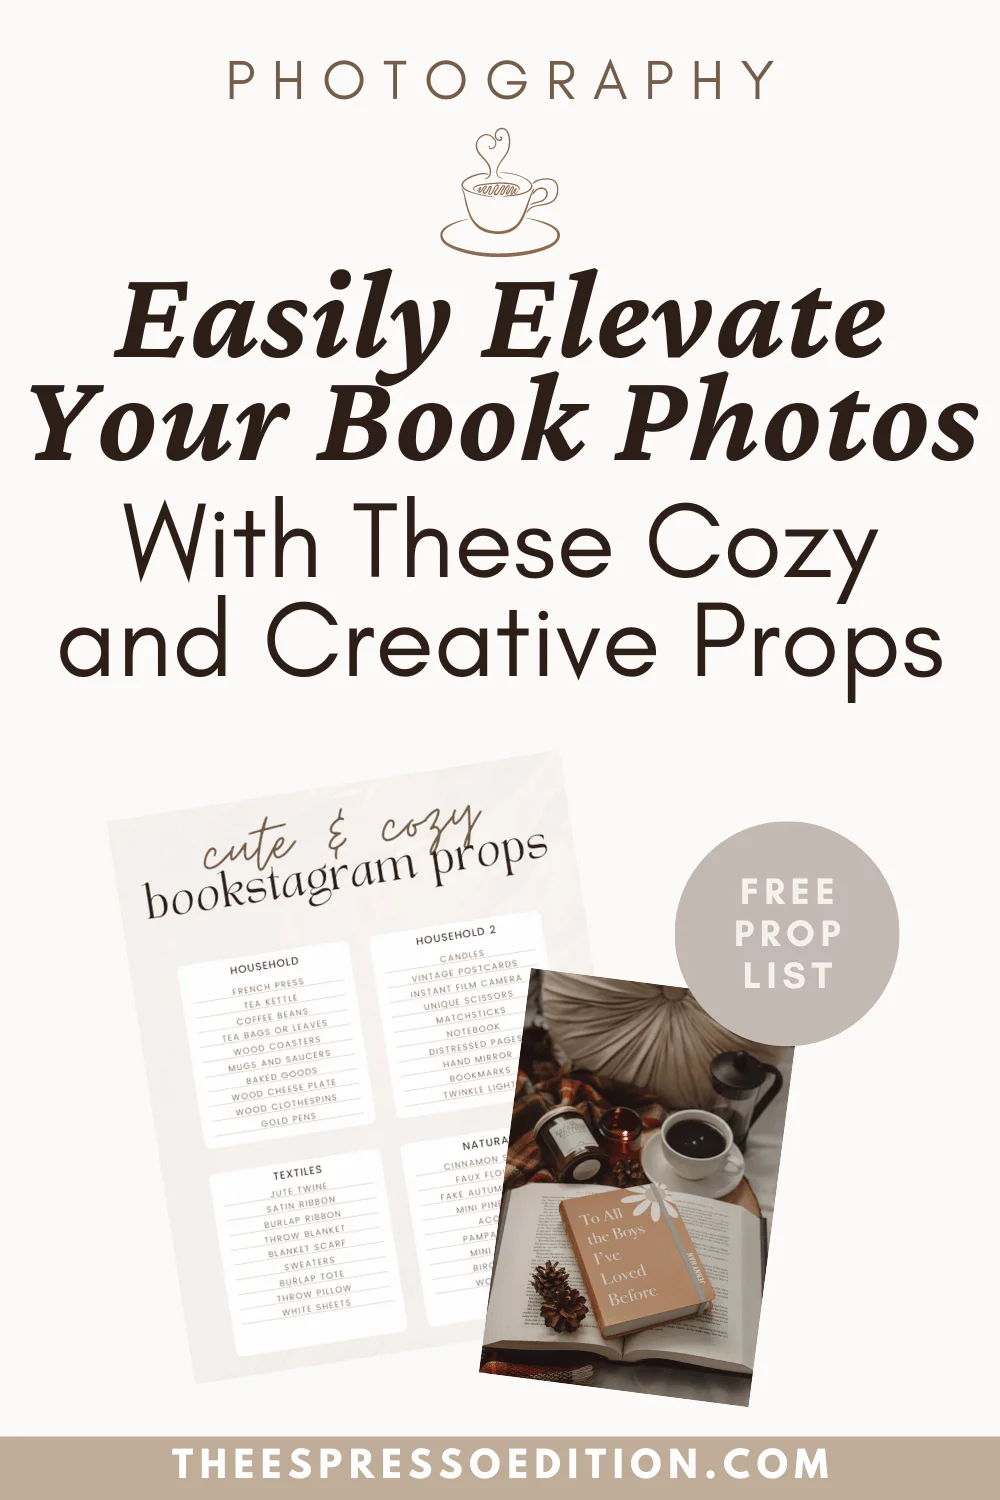 Easily Elevate Your Book Photos With These Cozy and Creative Props by The Espresso Edition cozy bookish blog